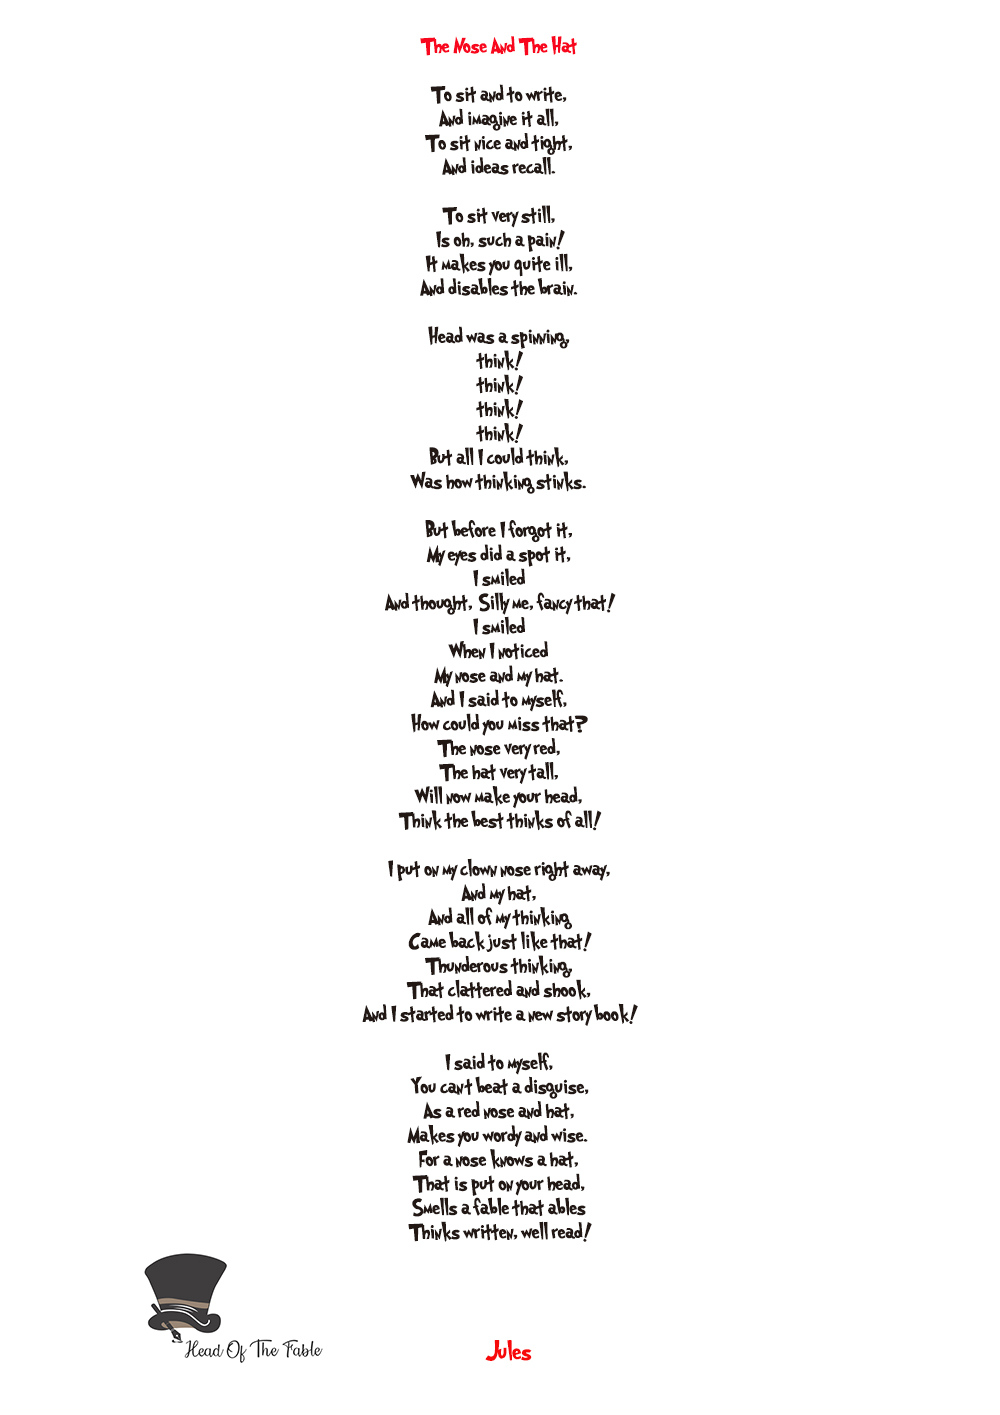 Dr. Seuss style poem by Jules Smith